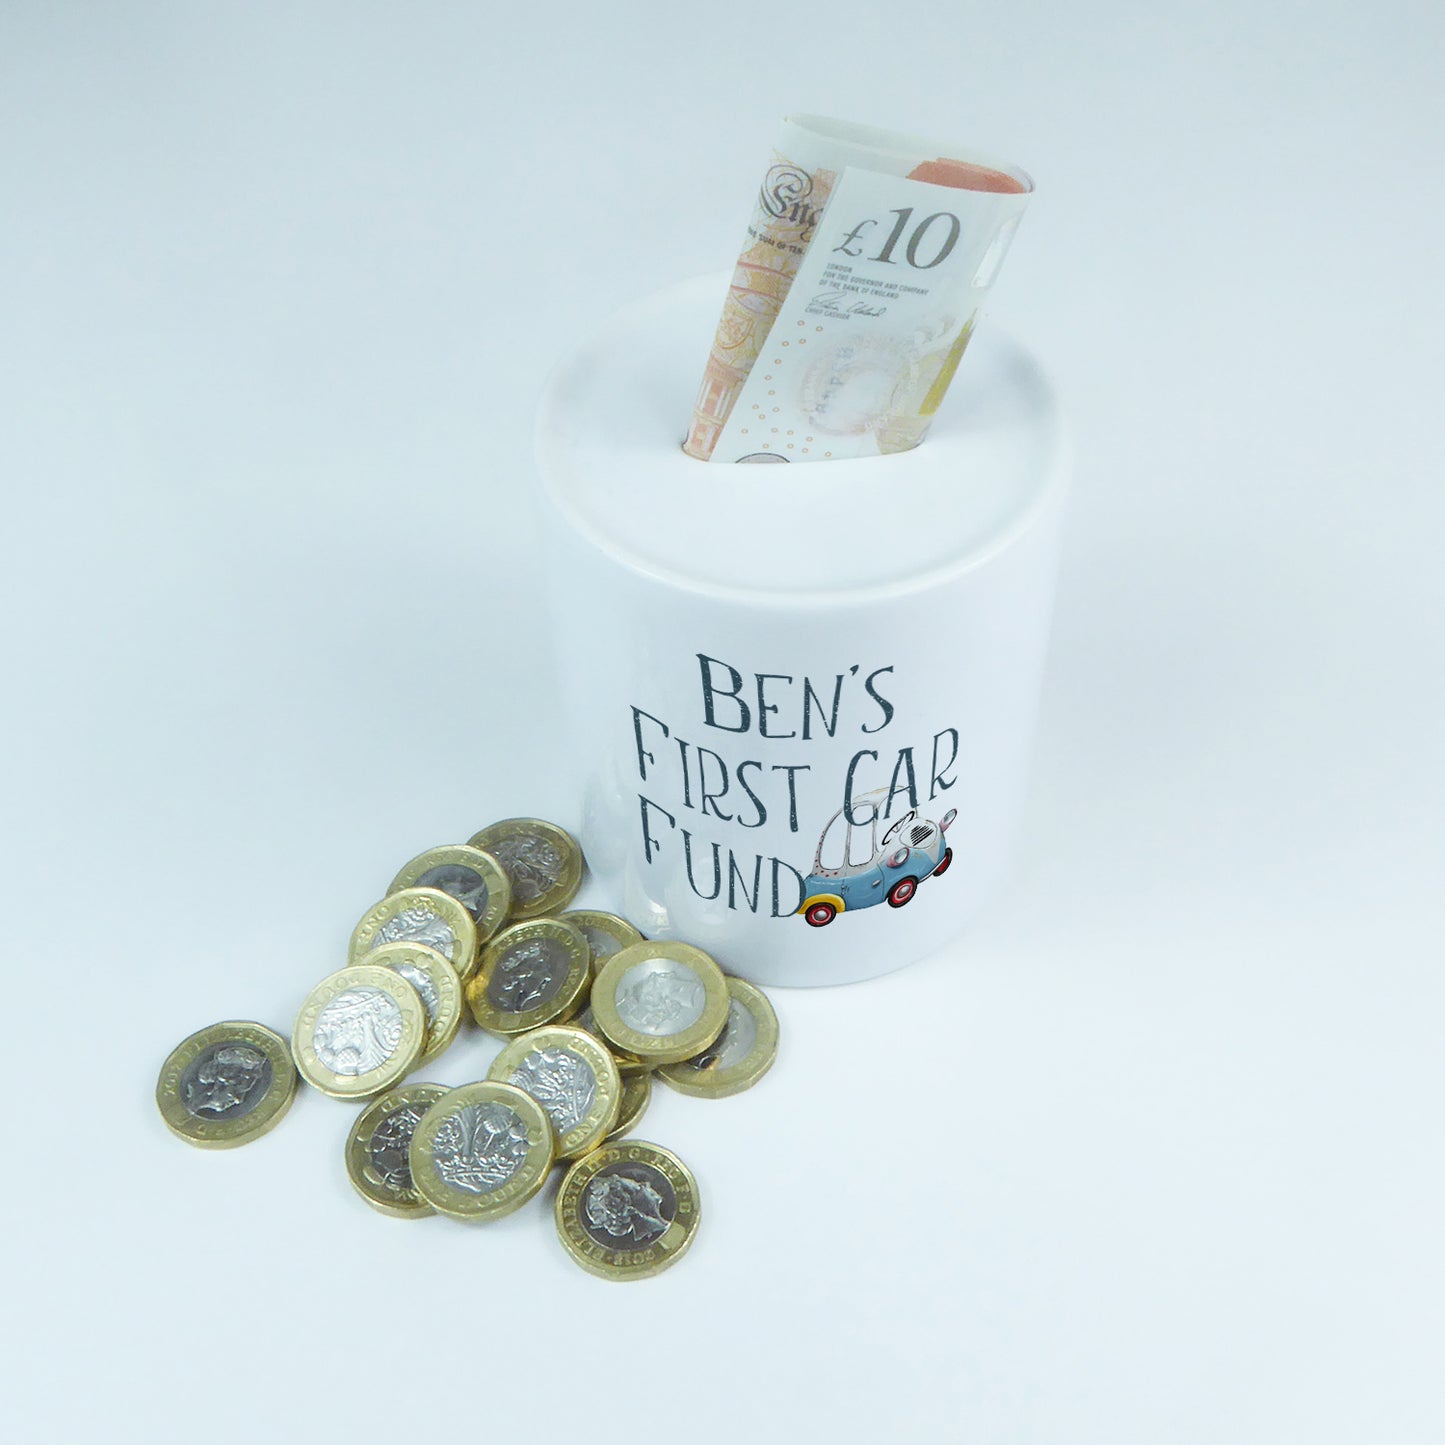 First car fund personalised name | Ceramic money box - Adnil Creations